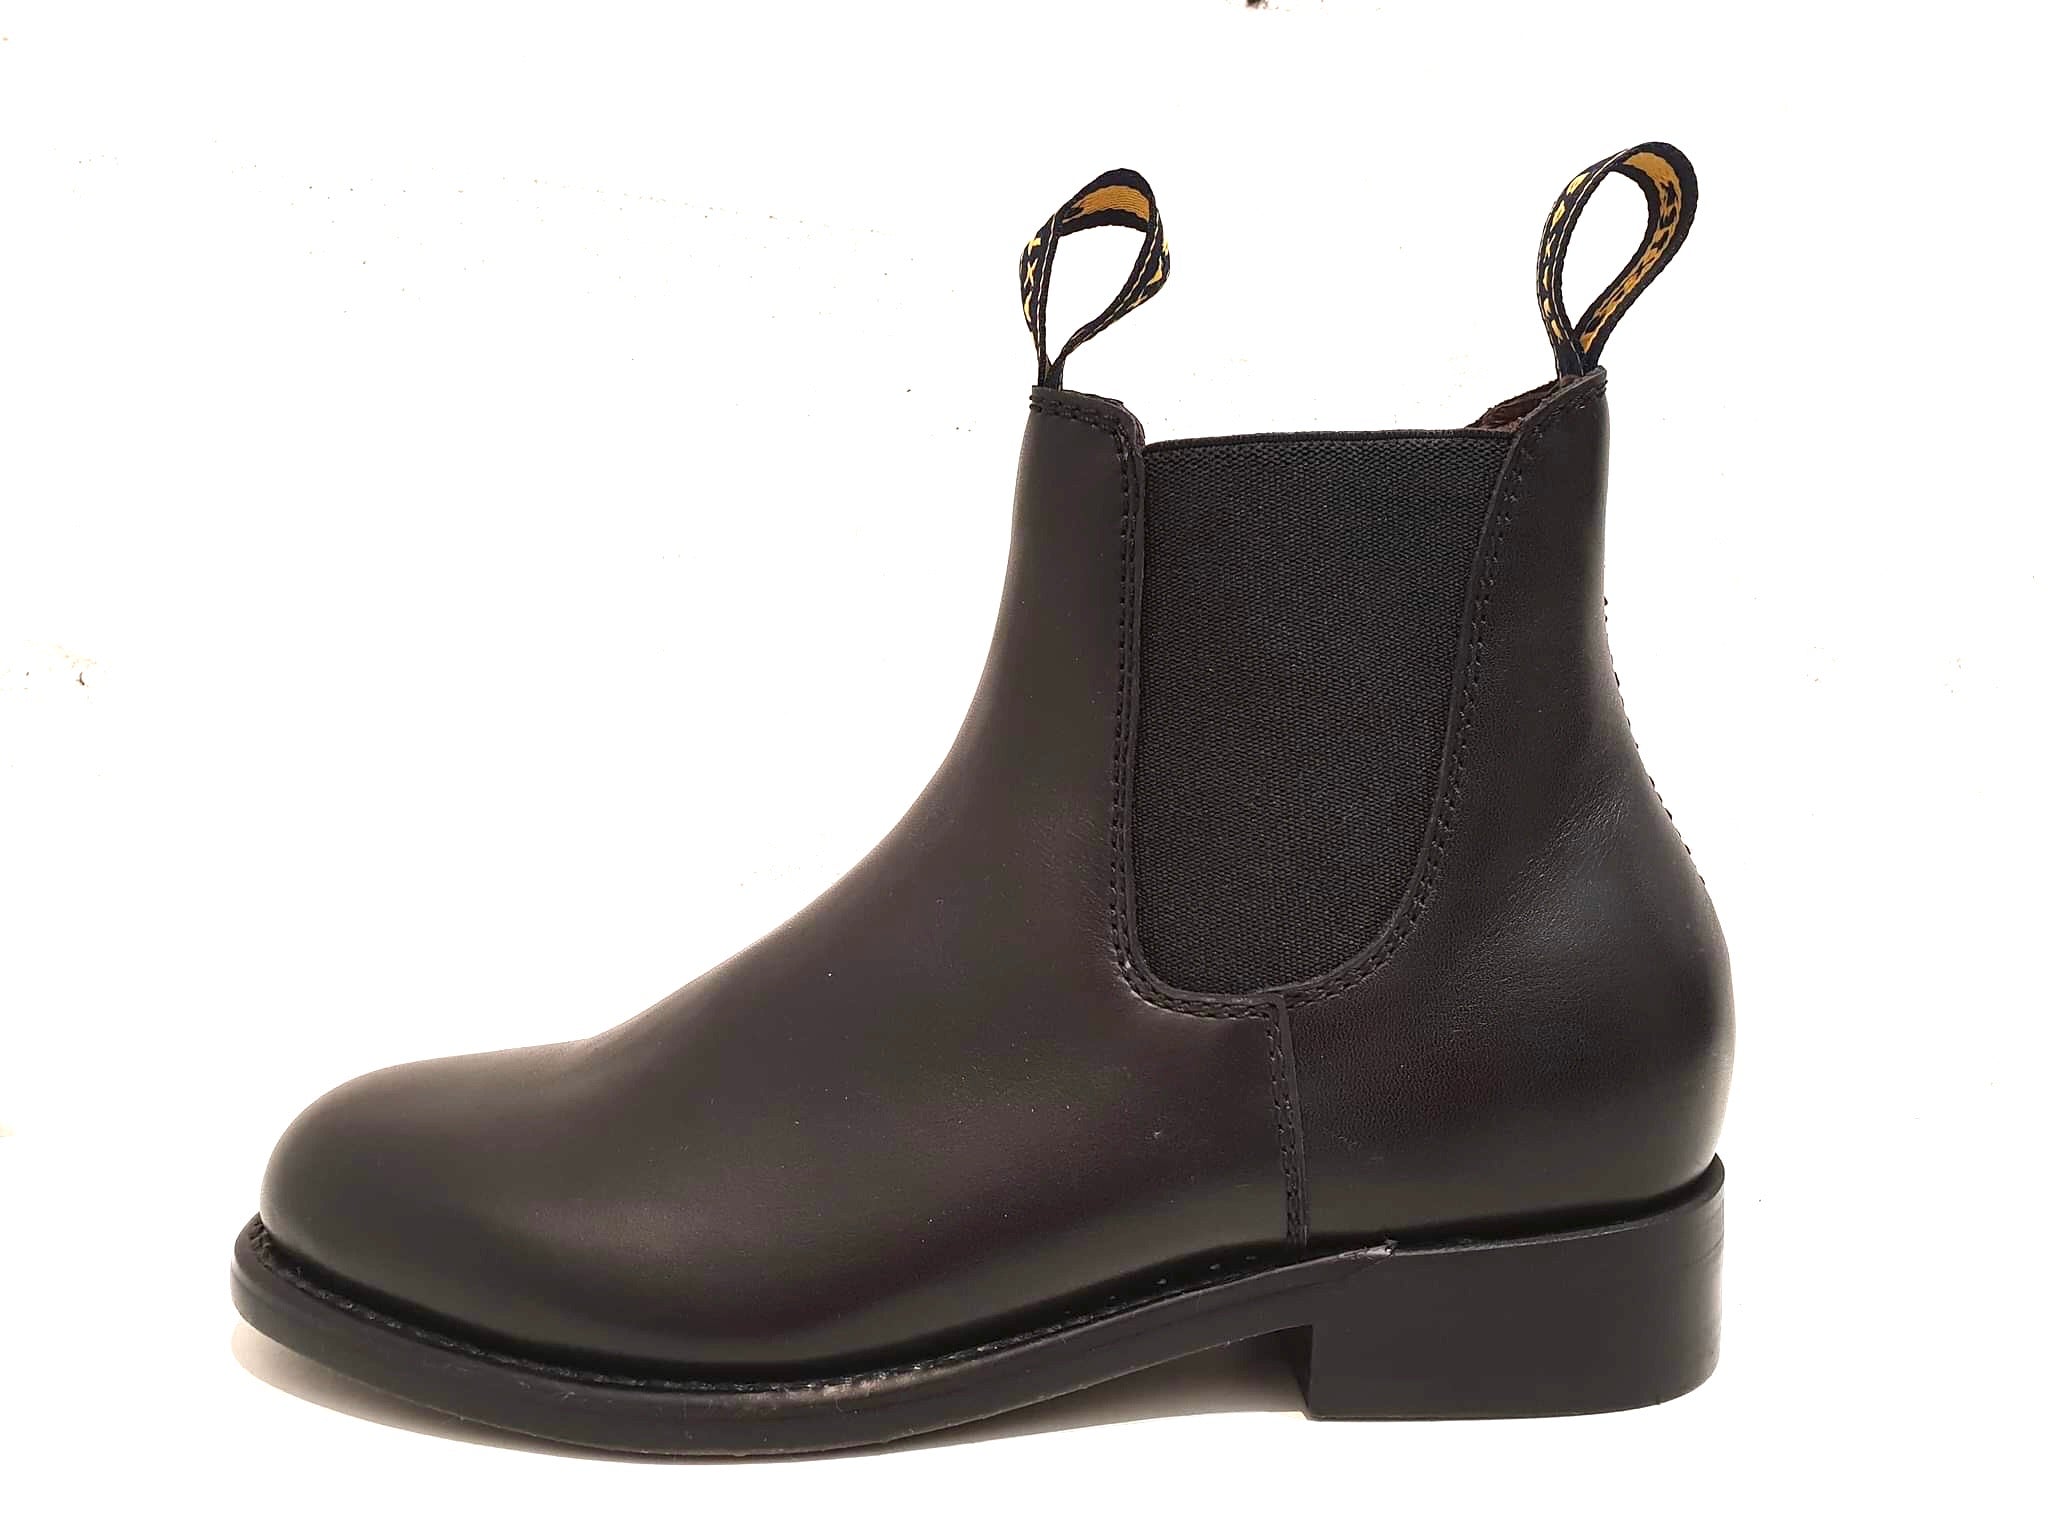 Baxter Royal Black Rubber Sole Chelsea Dress Boot Made In Australia